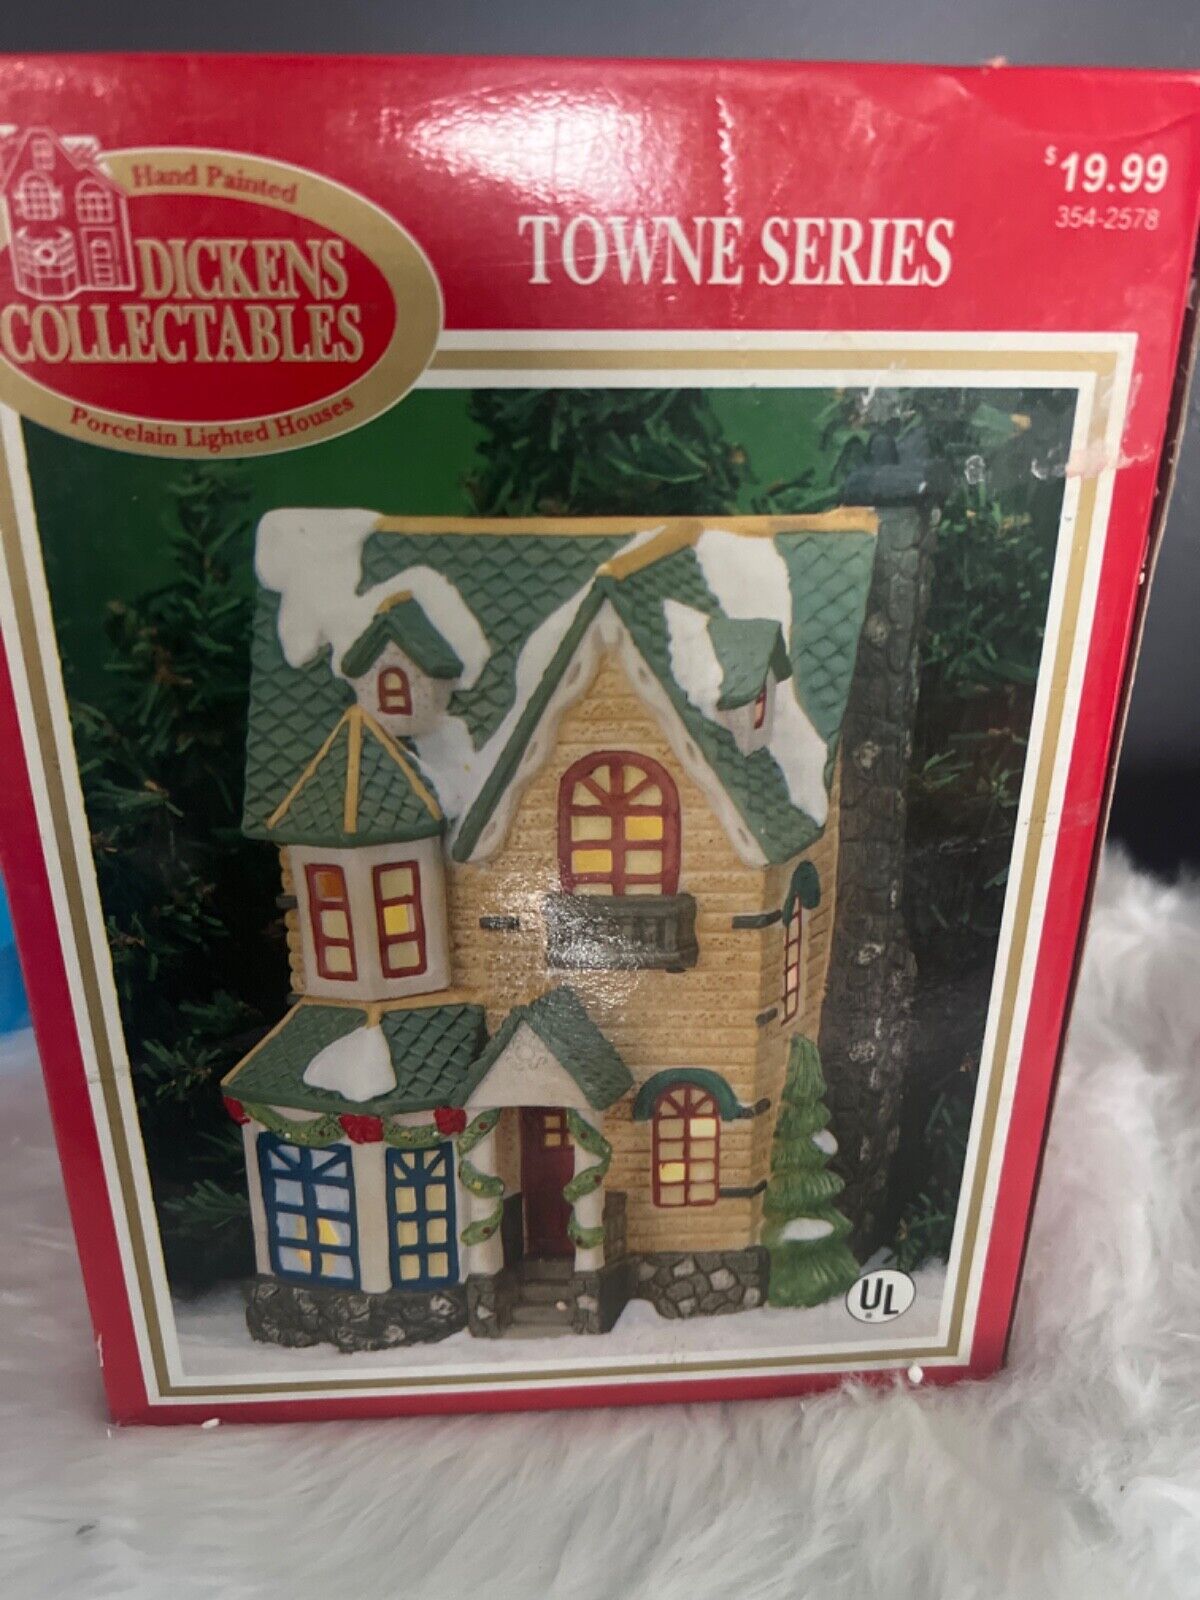 VTG  Dickens Collectables Victorian series 1998 Christmas Village